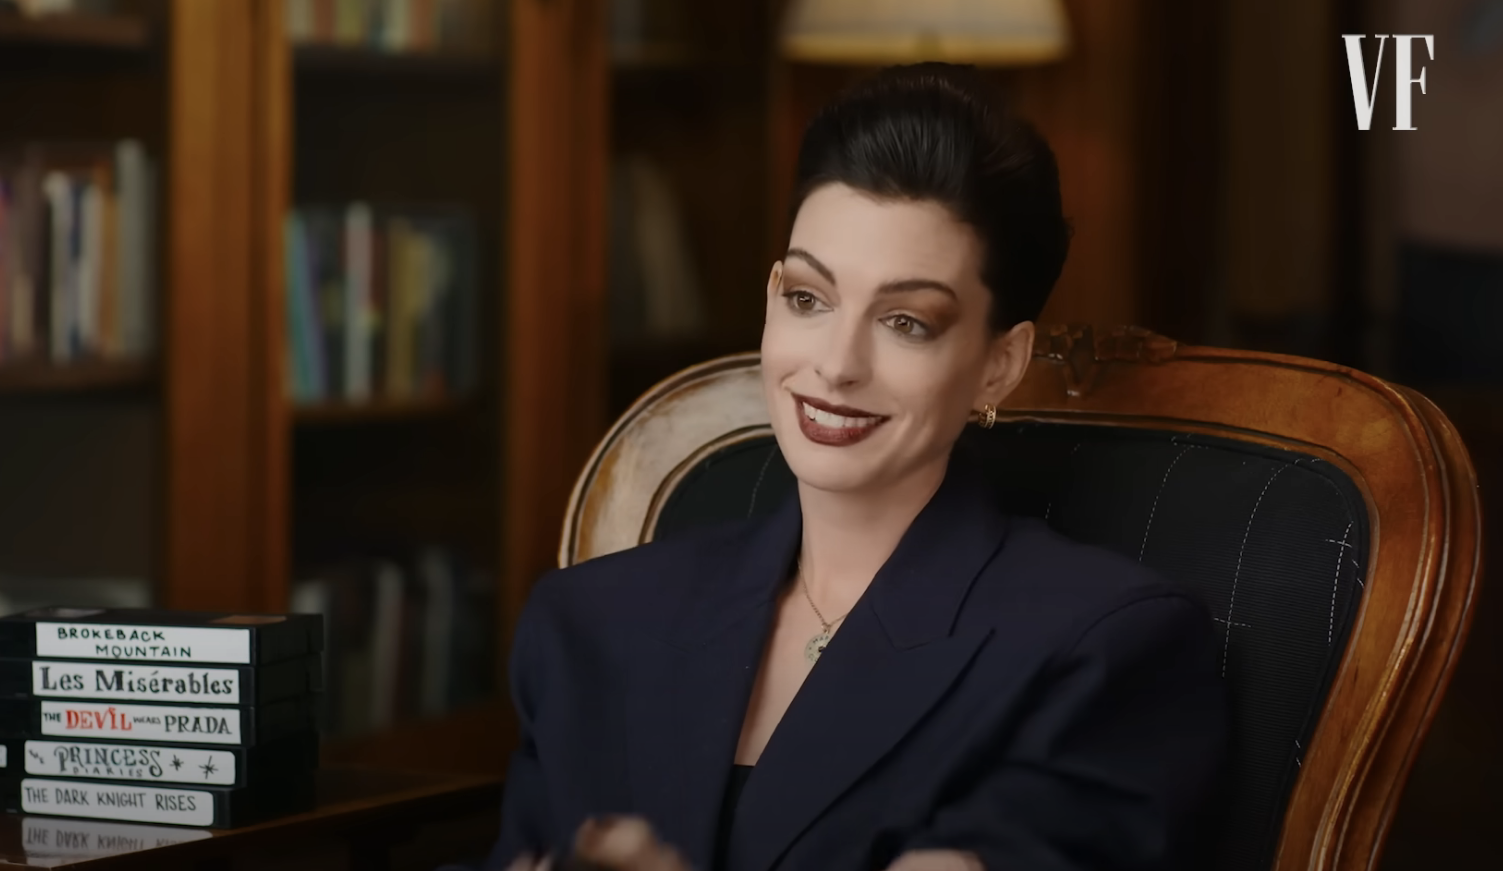 Anne Hathaway in a dark blazer, seated, gesturing mid-interview with books in the background